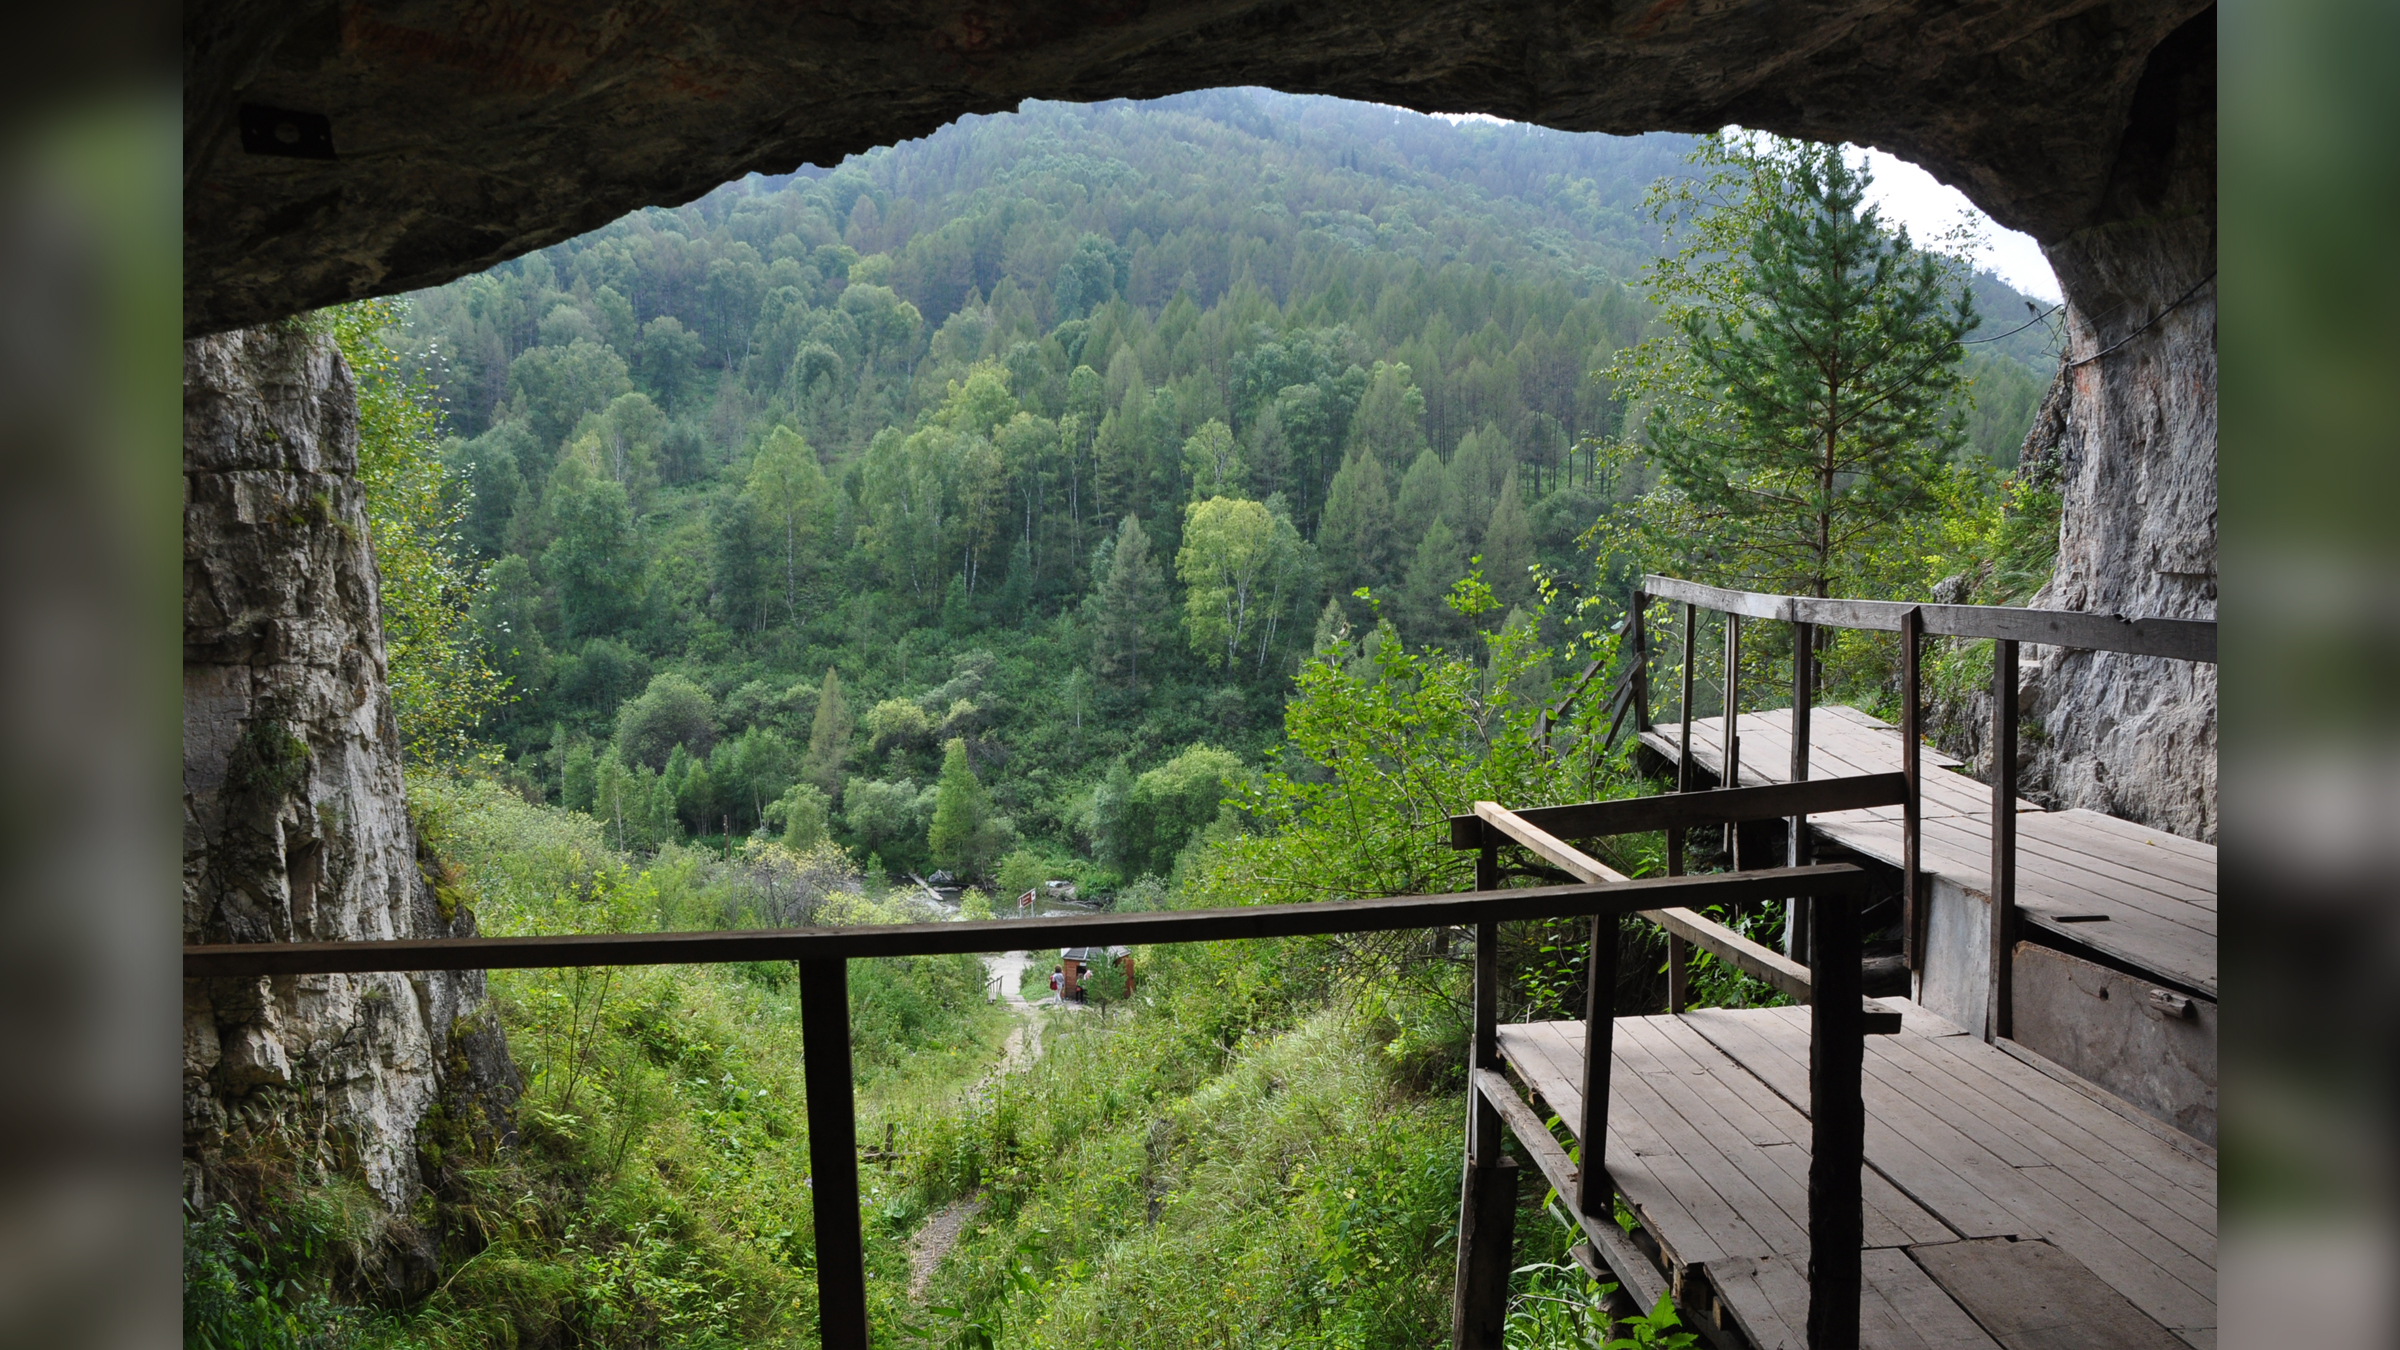 A view from inside Denisova cave in Russia's Altai Mountains. Notice how the vegetation and climate is different here compared with Laos.